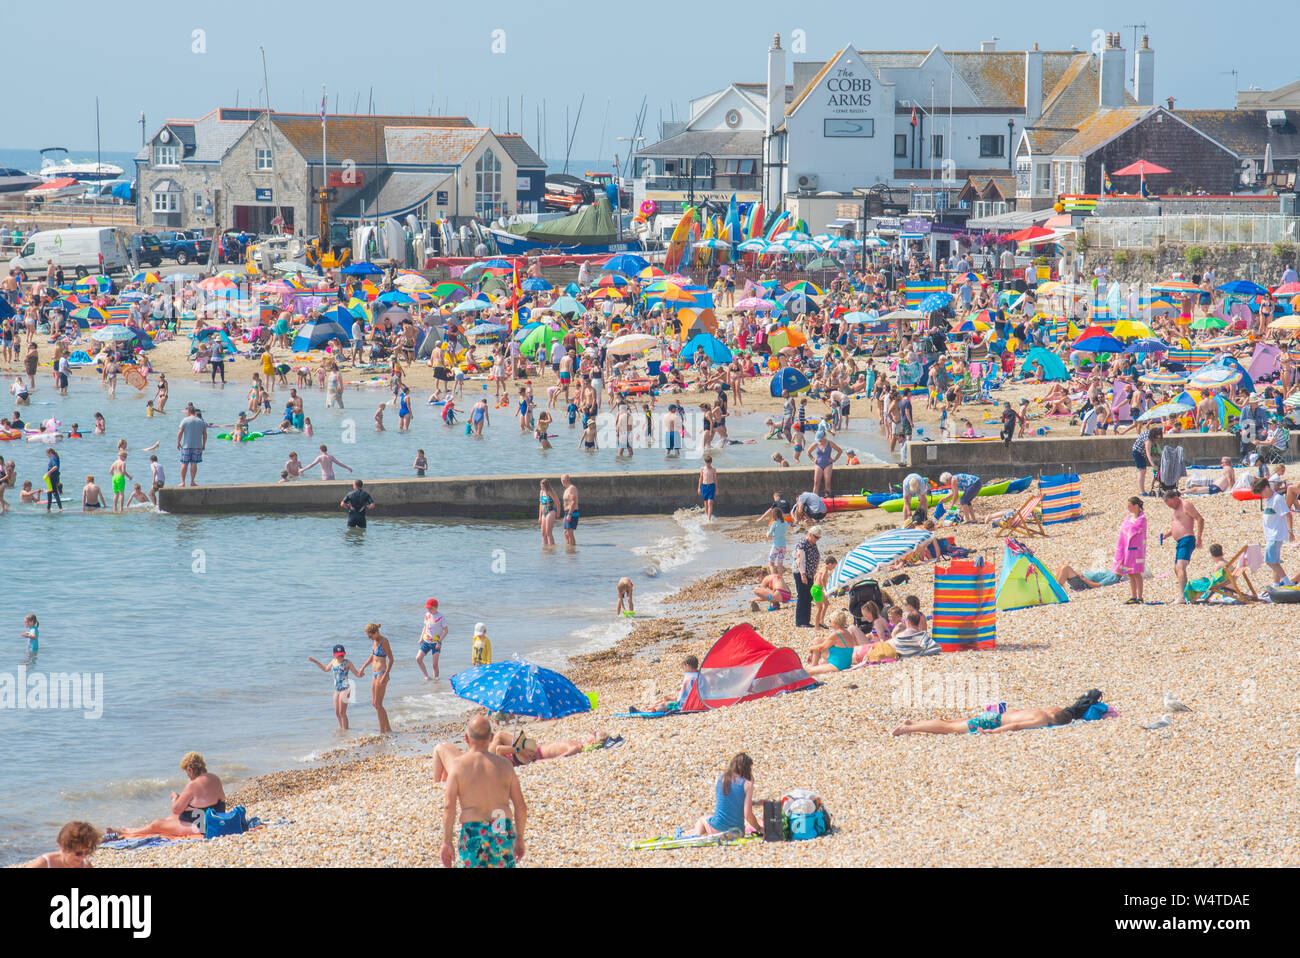 Lyme Regis, Dorset, UK. 25th July 2019. UK Weather: Crowds of sunskeekers swelter in record breaking heat on the beach at the seaside resort of Lyme Regis on what is expected to be the hottest day in the UK ever.  British holidaymakers swelter in sizzling hot sunshine on the town's packed beach as temperatures soar towards 40 degrees centigrade.  The cooling sea is welcome relief from the searing heat as the July heatwave continues. Credit: Celia McMahon/Alamy Live News. Stock Photo